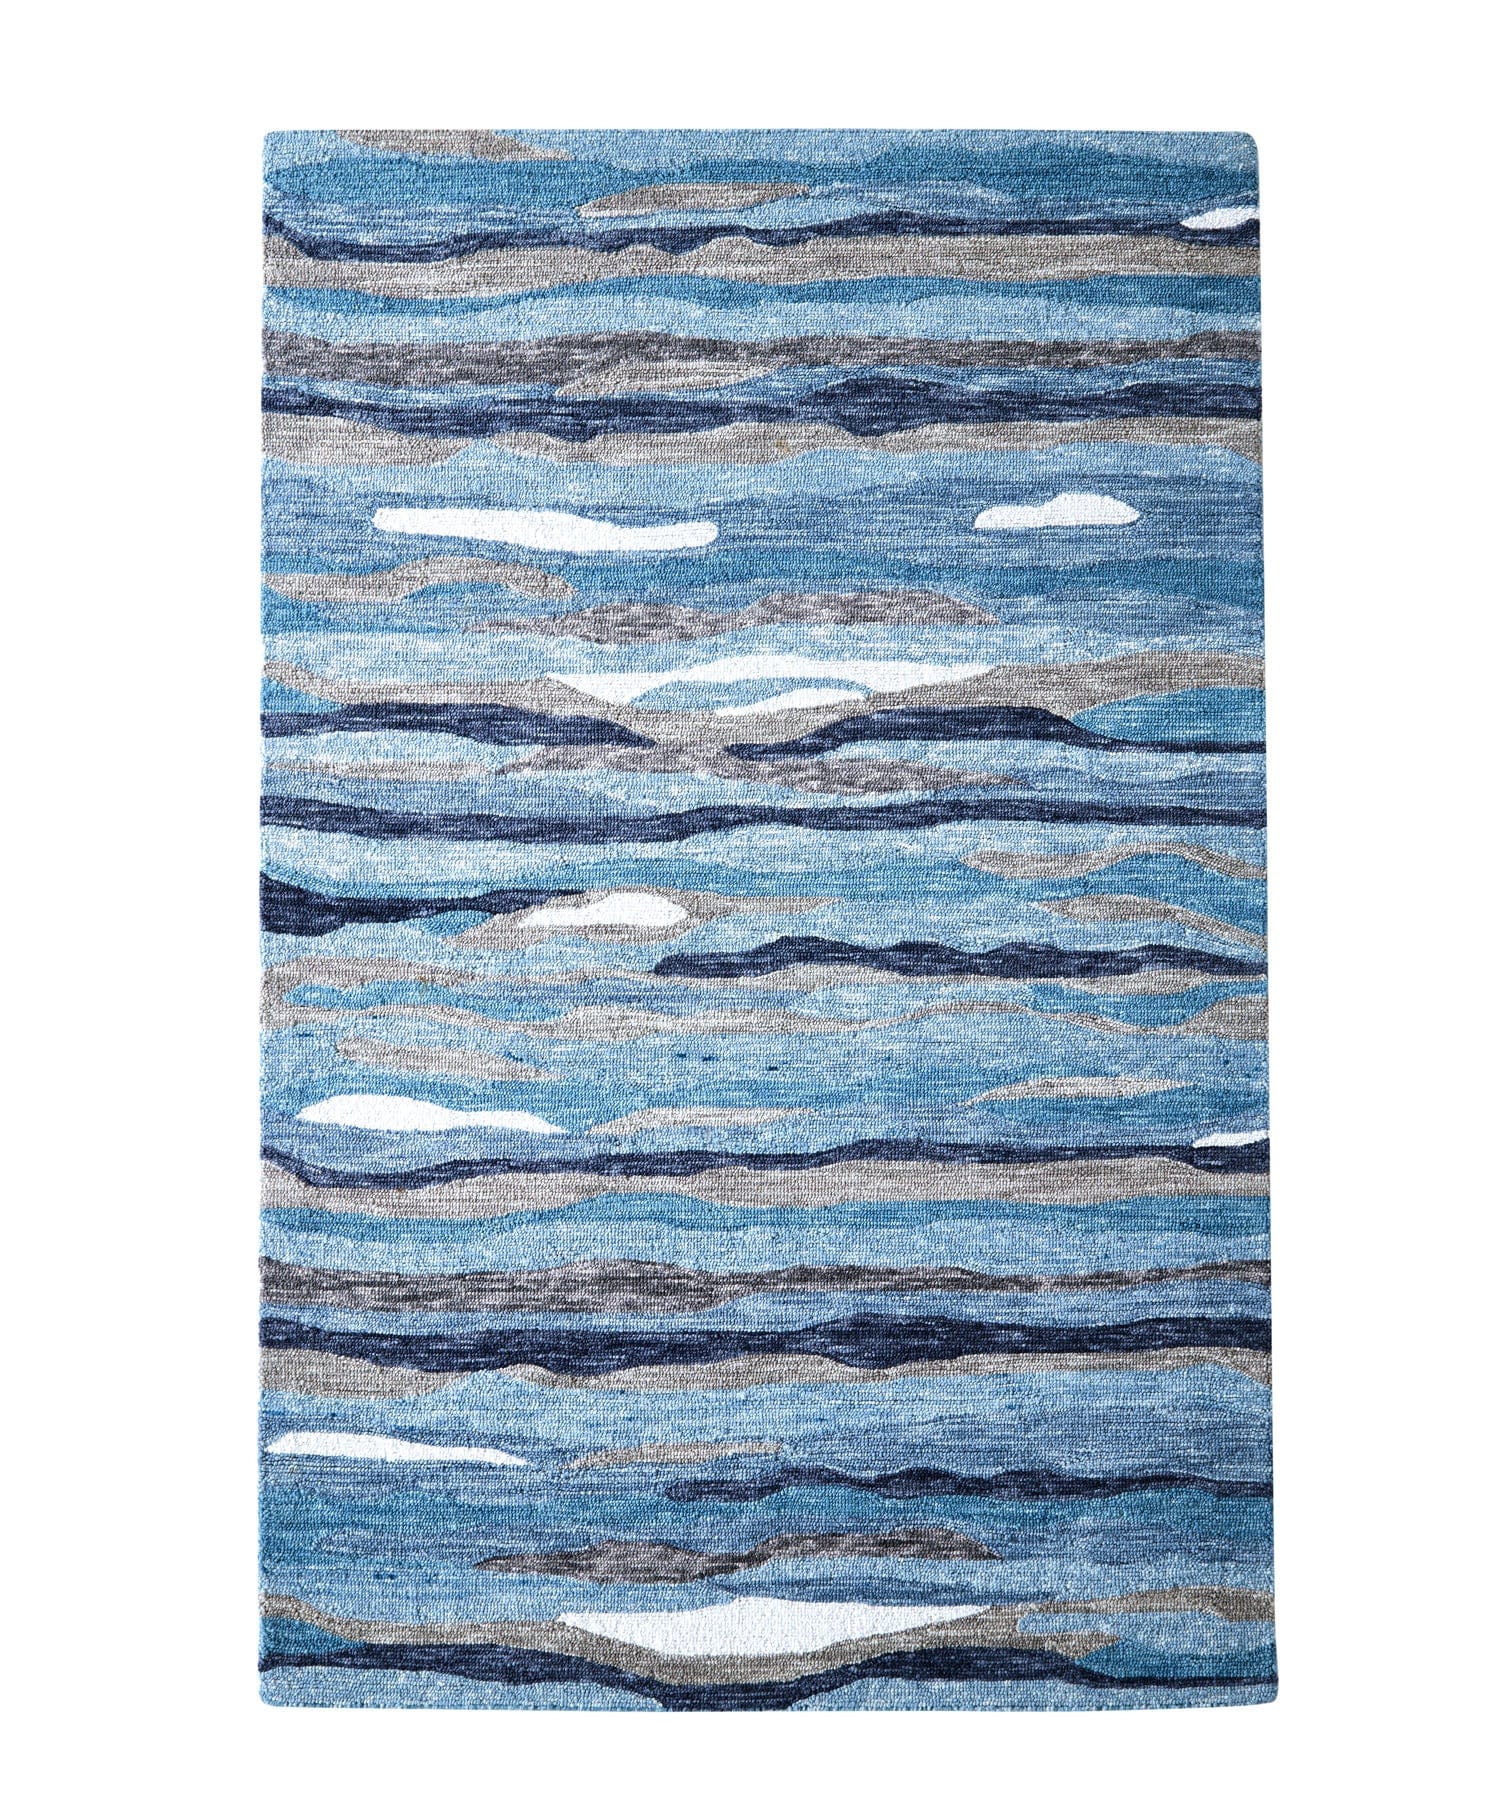 1 Rug of 1.2 M X 1.8 M